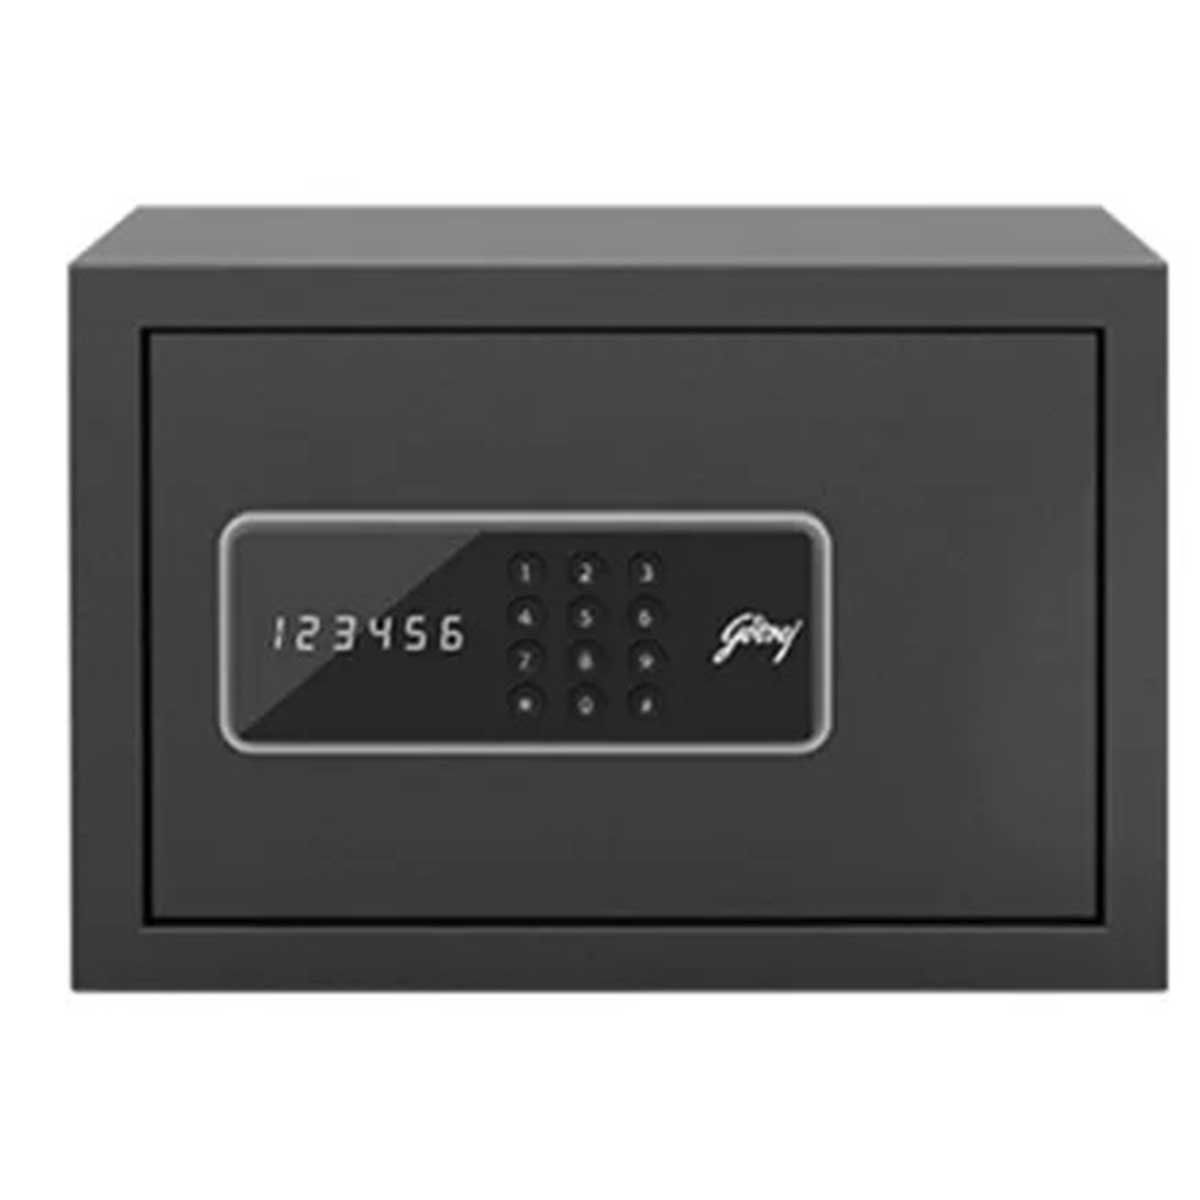 Security Safes Manufacturers, Suppliers in Vasant Kunj